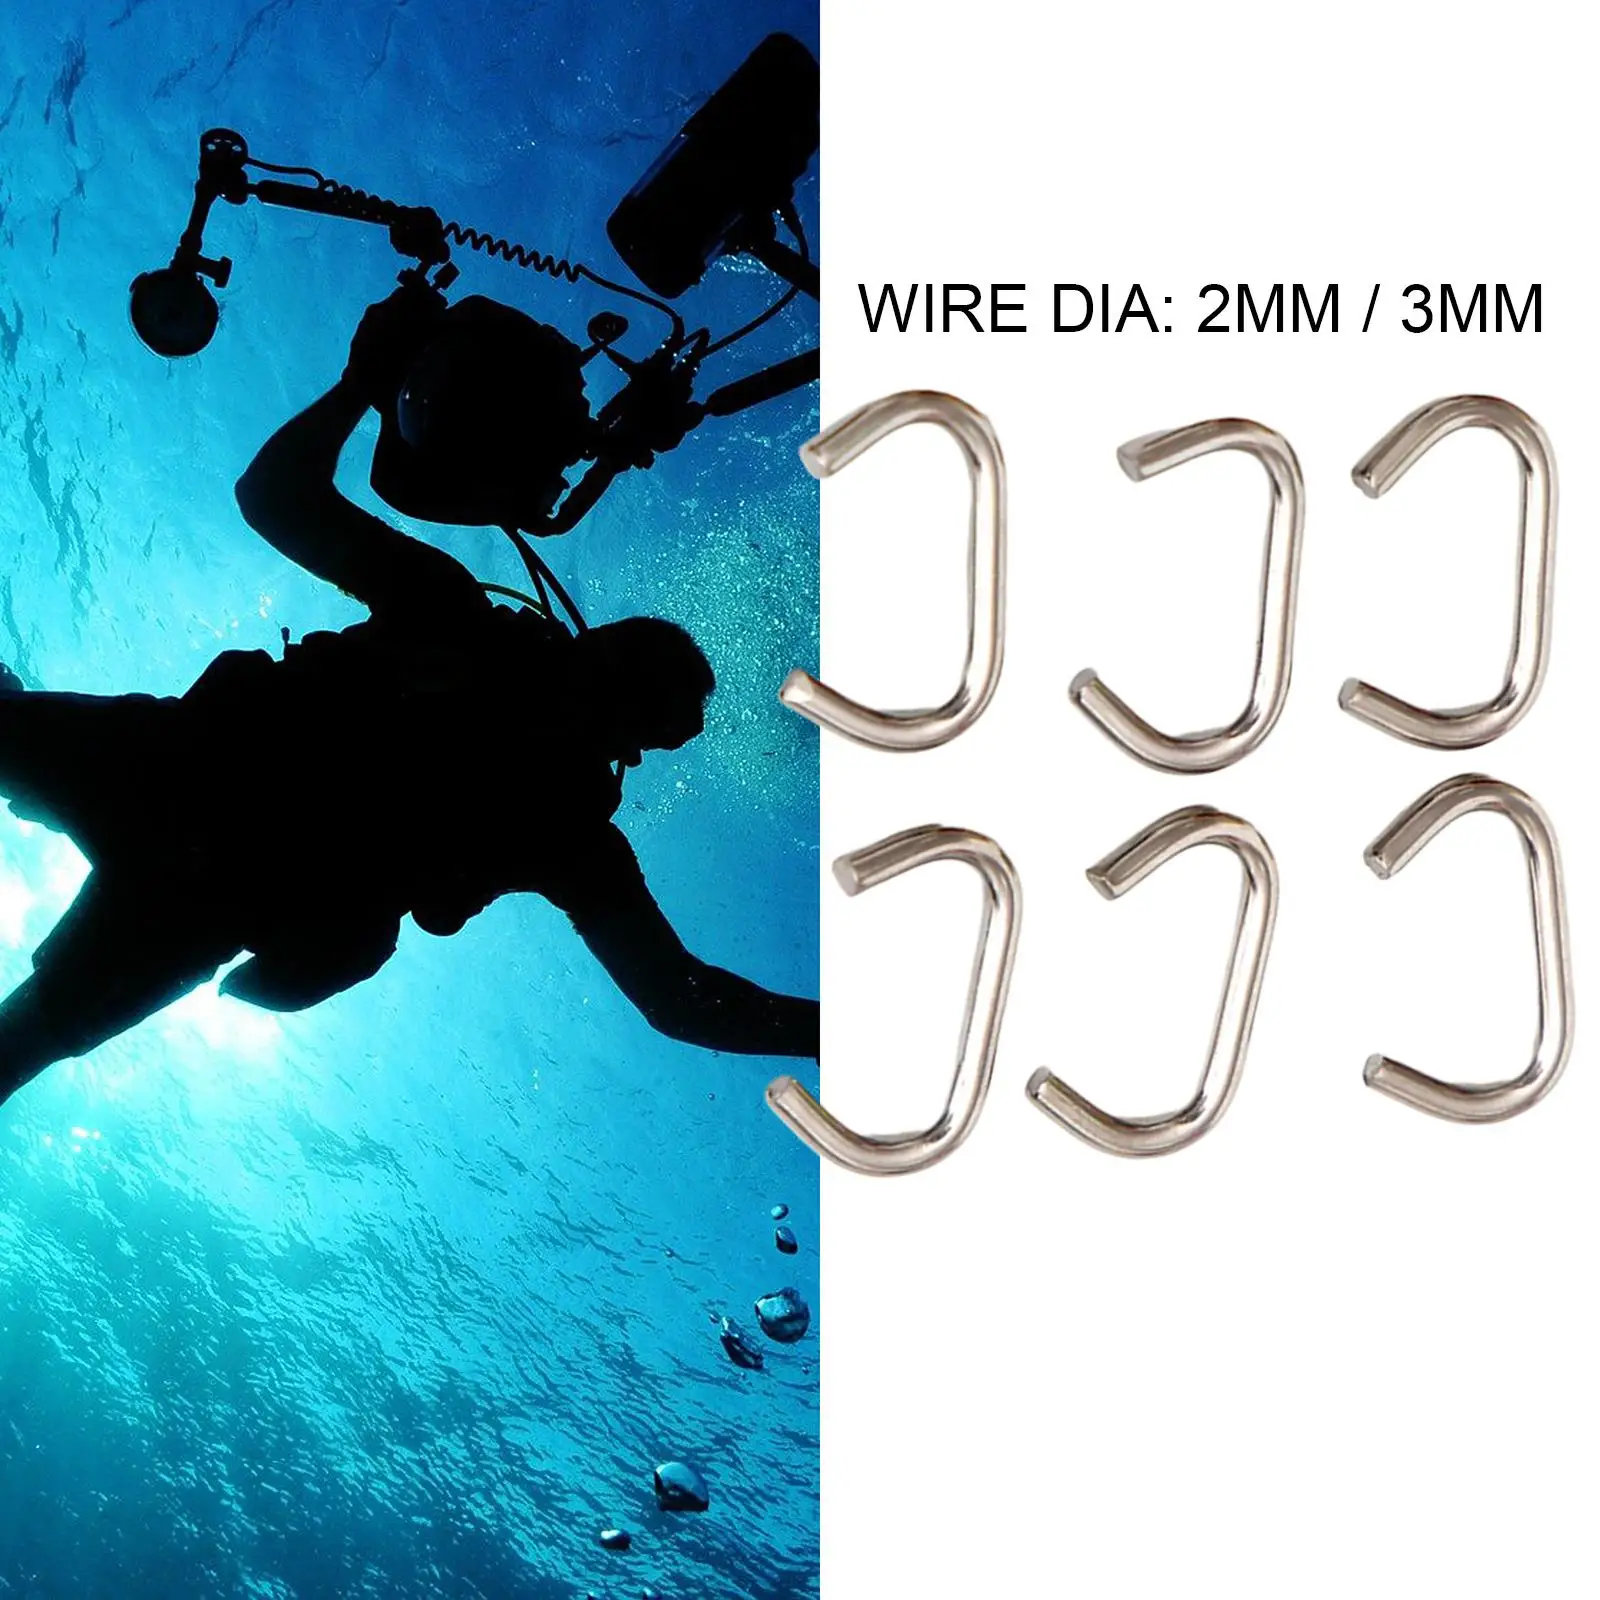 6Pack Stainless Steel Bolt Clip Diving Hook BCD Accessories Diving Equipment